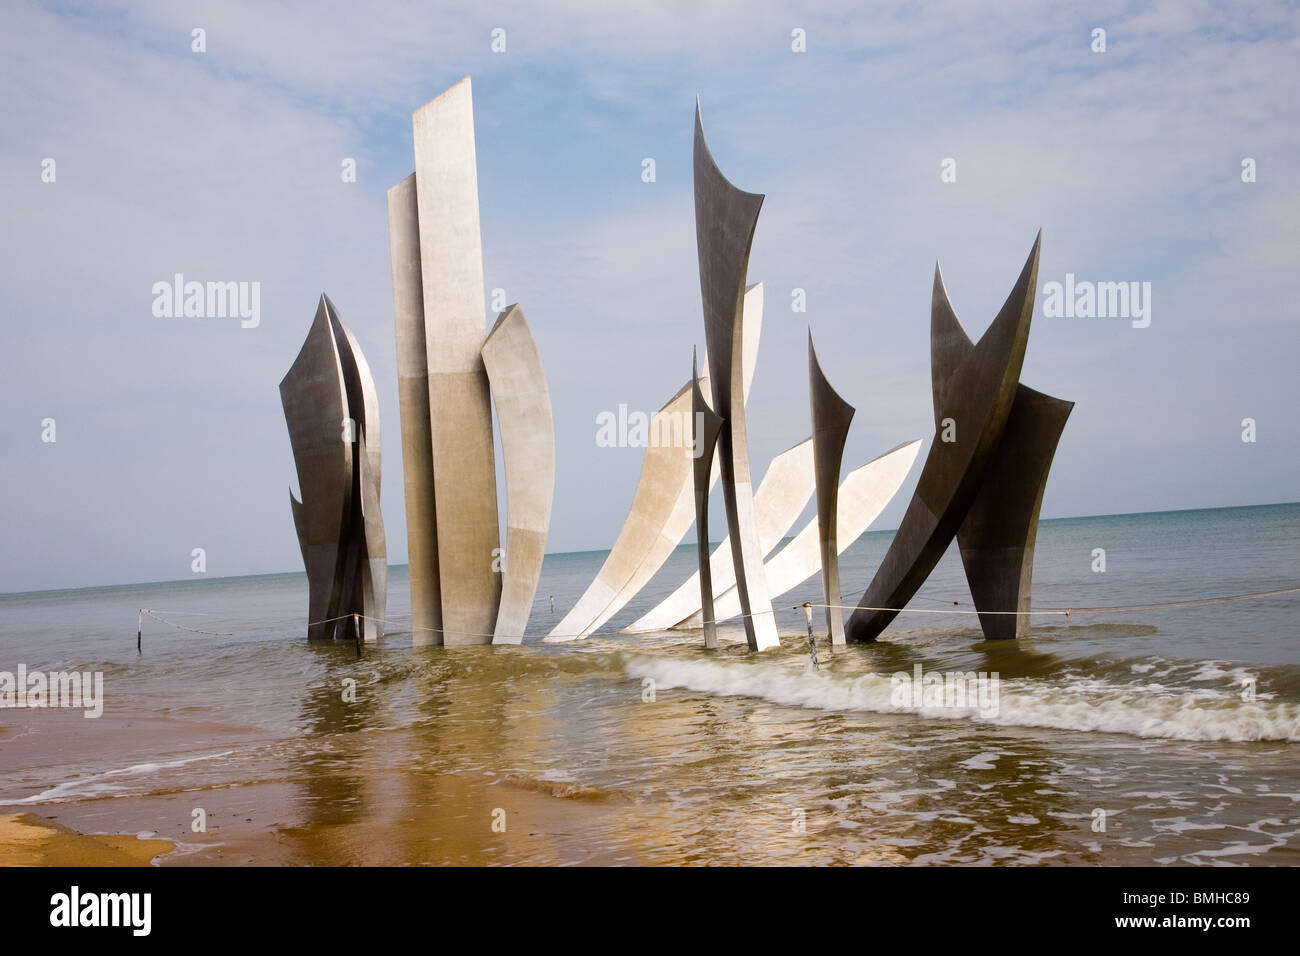 Les Braves A Sculpture By Anilore Banon On Omaha Beach To